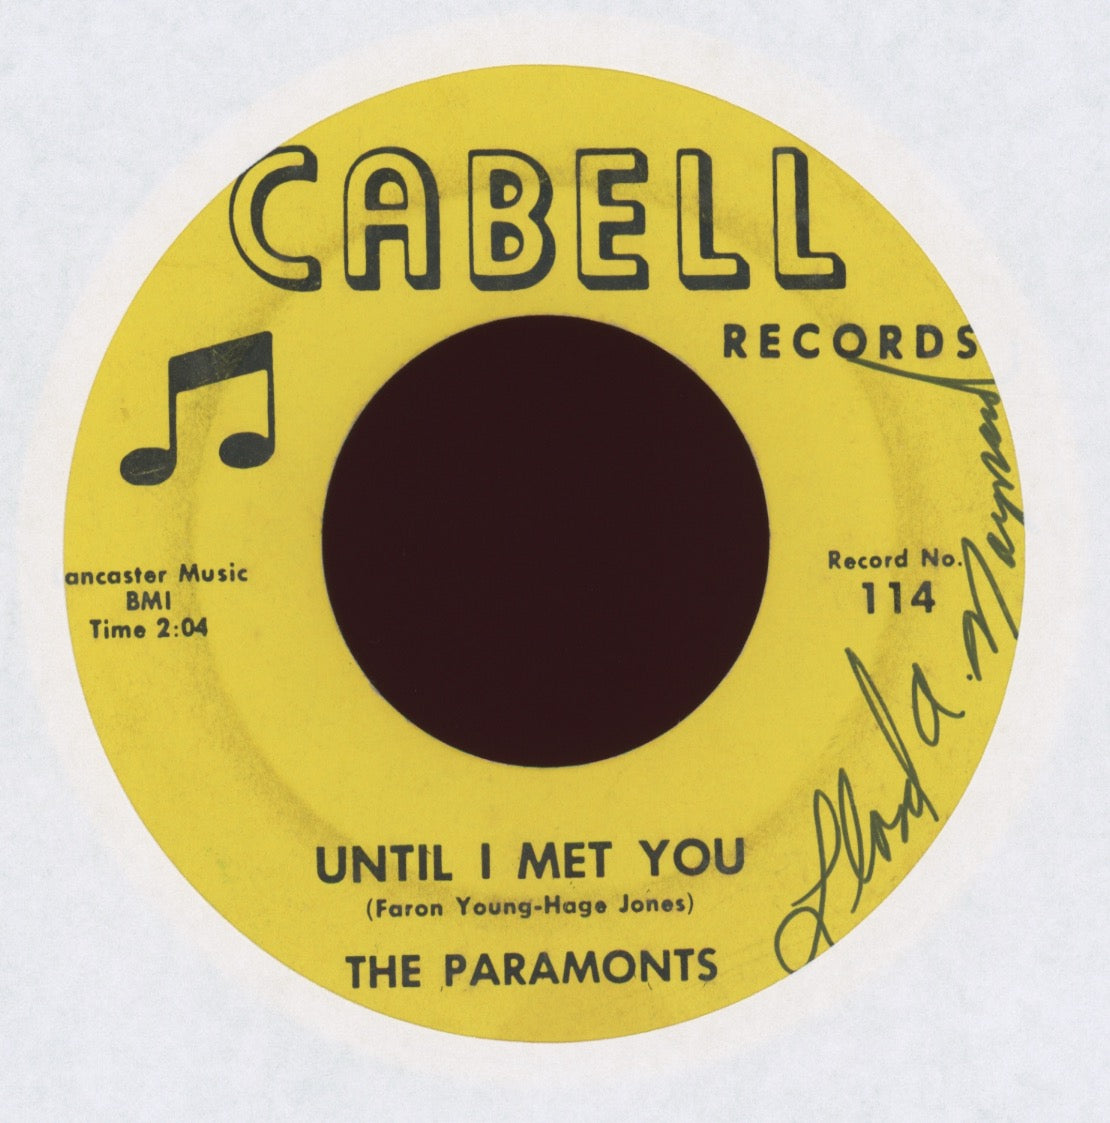 The Paramonts – Until I Met You on Cabell